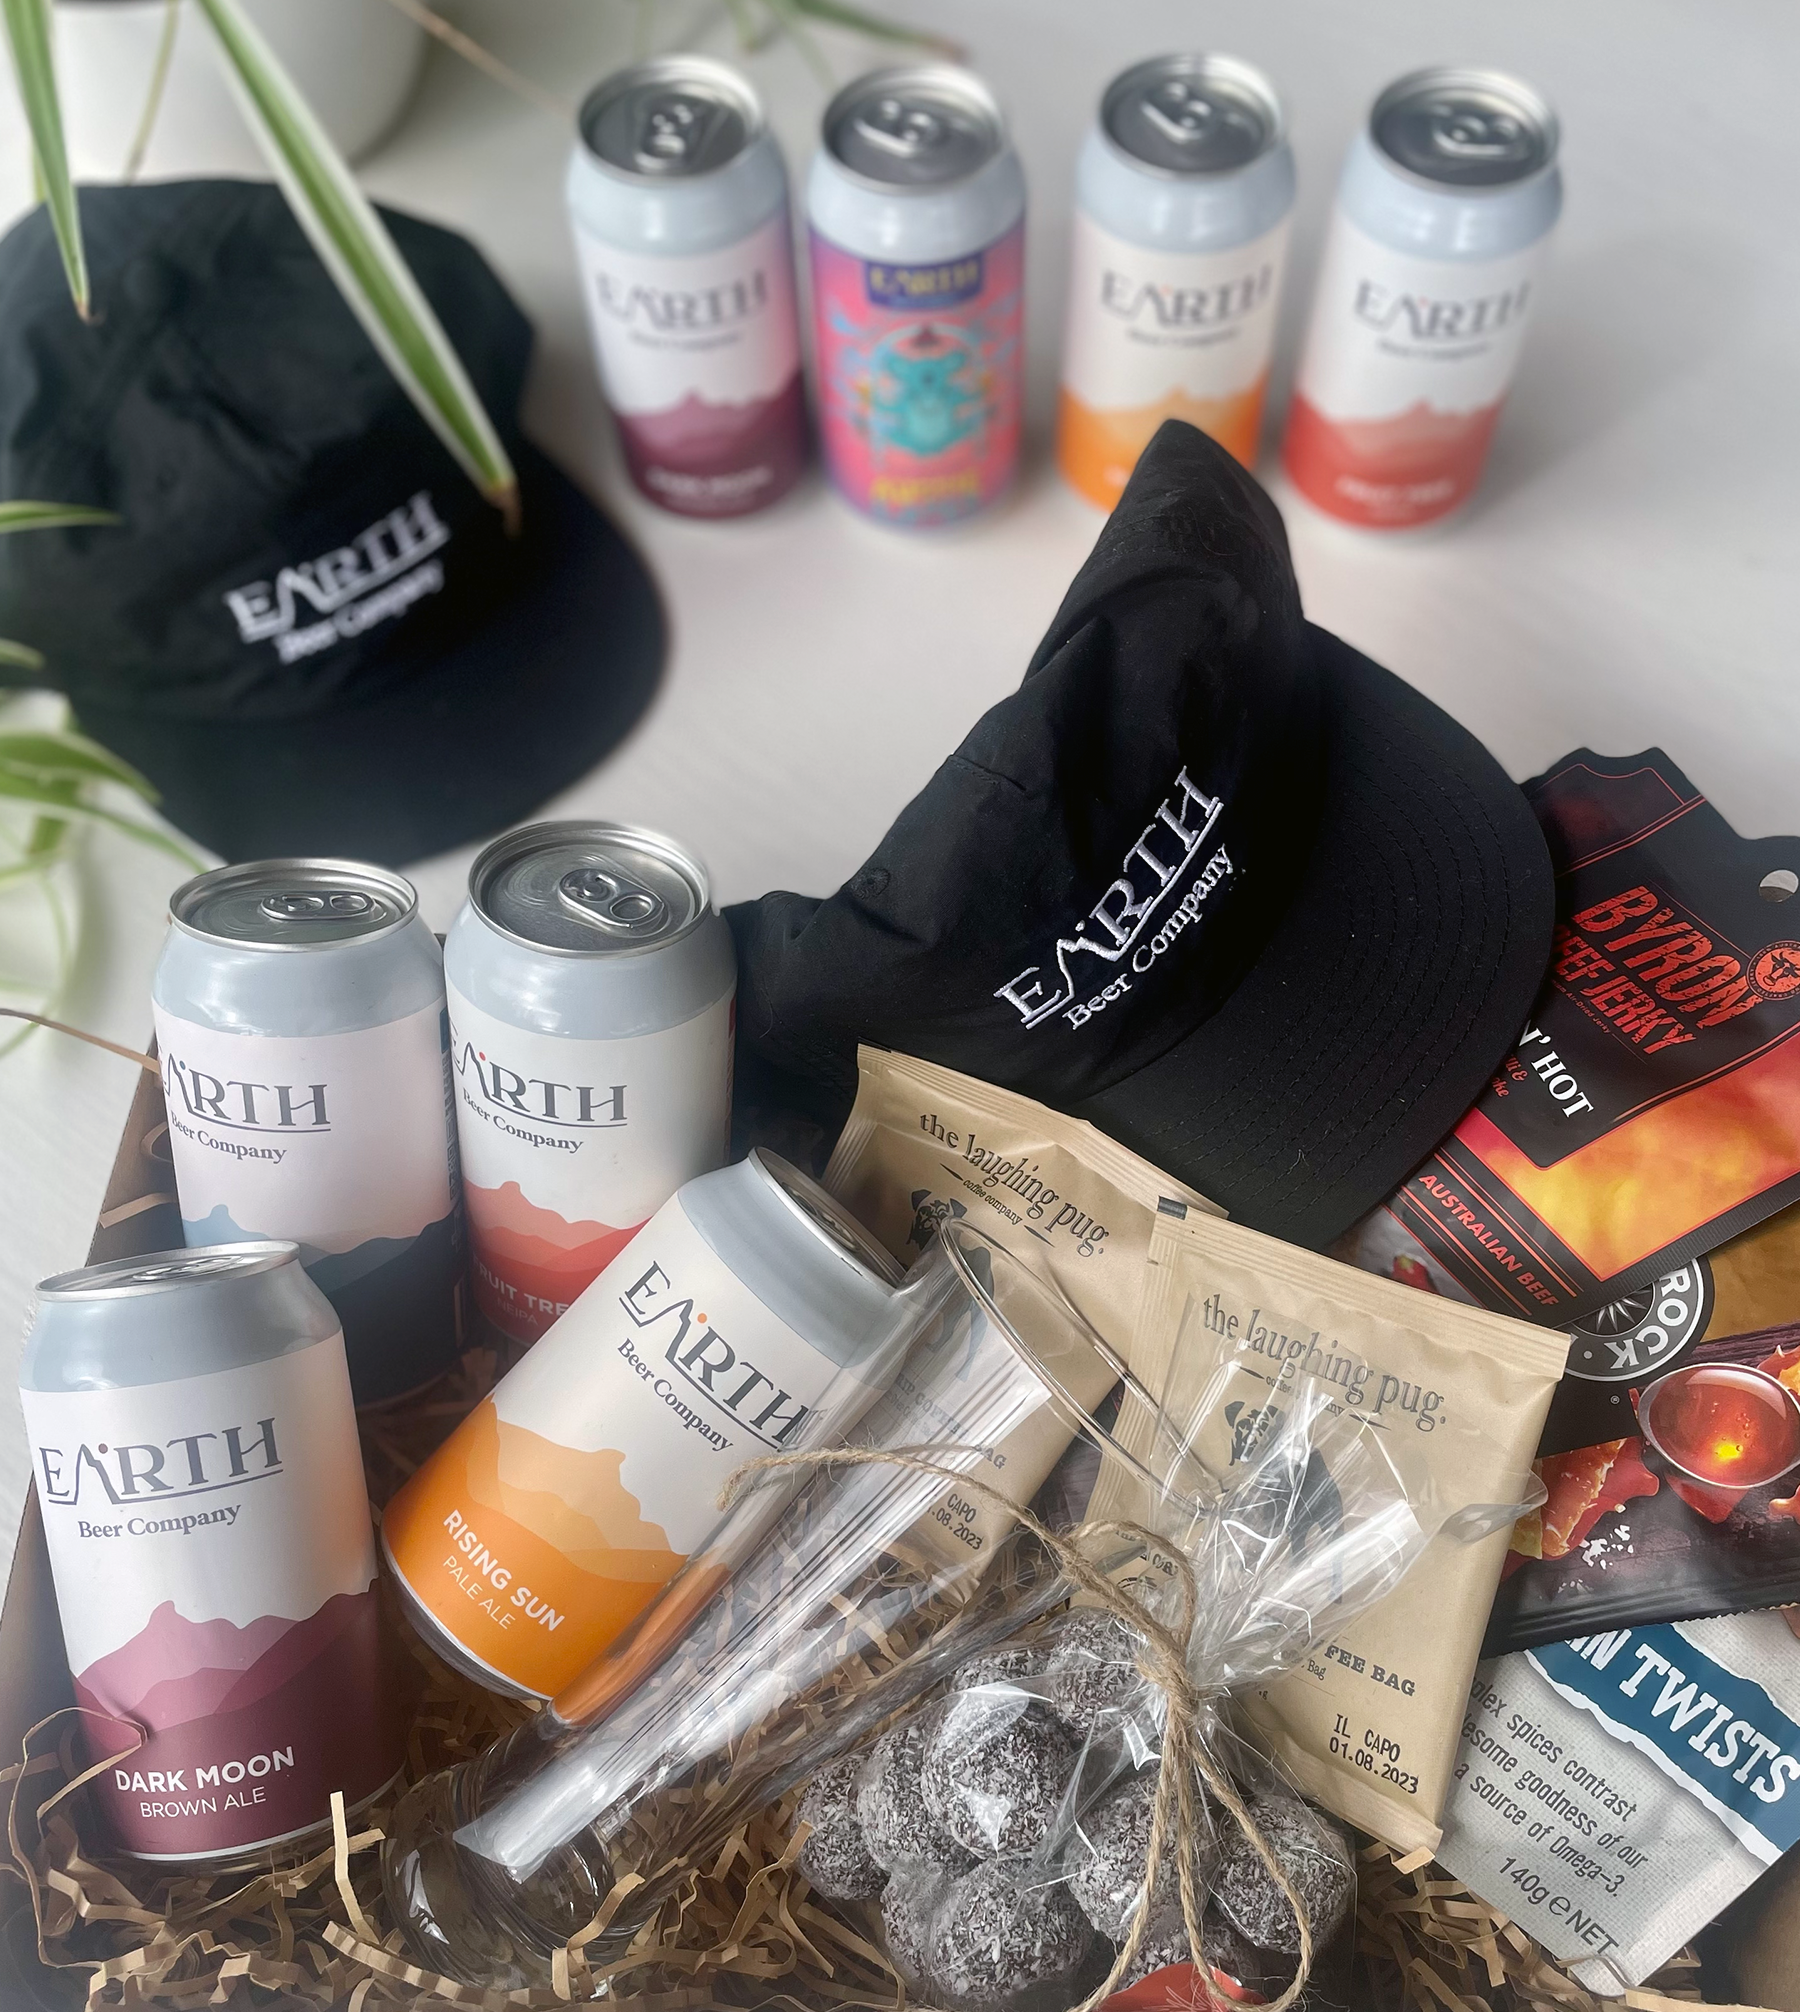 The Earth Gift Pack – Limited Edition